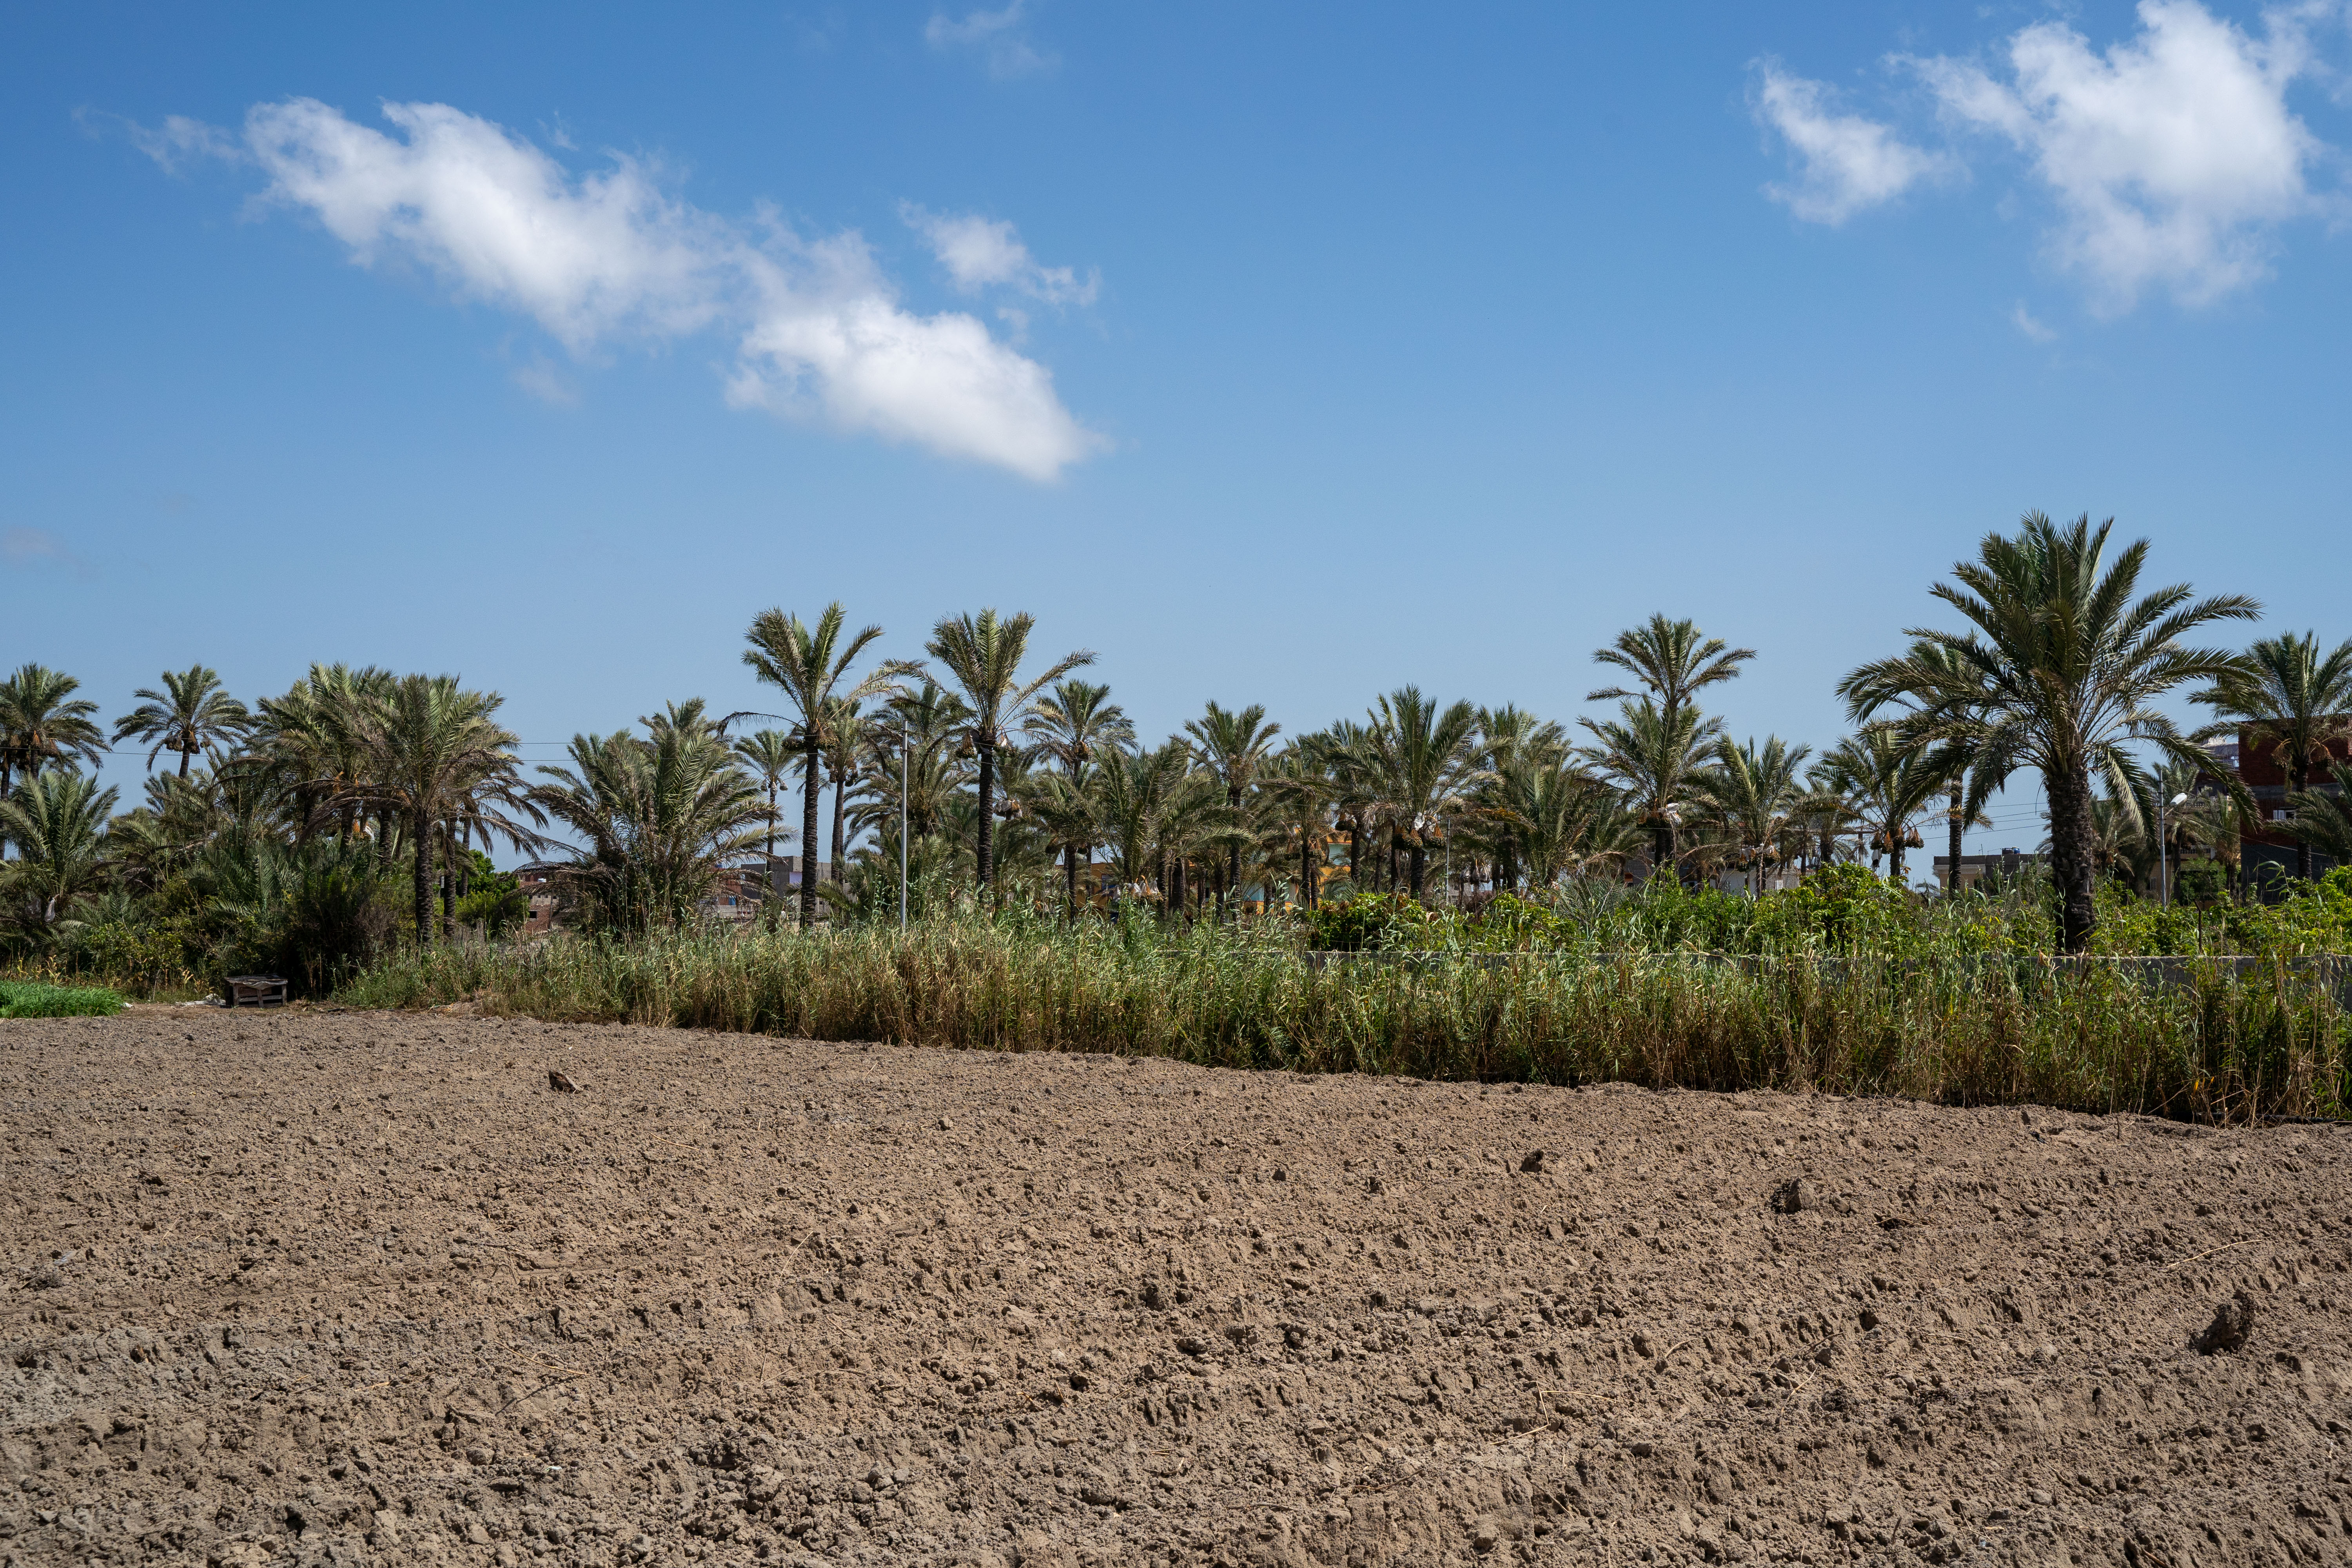 Climate change threatens the Nile's critical water supply